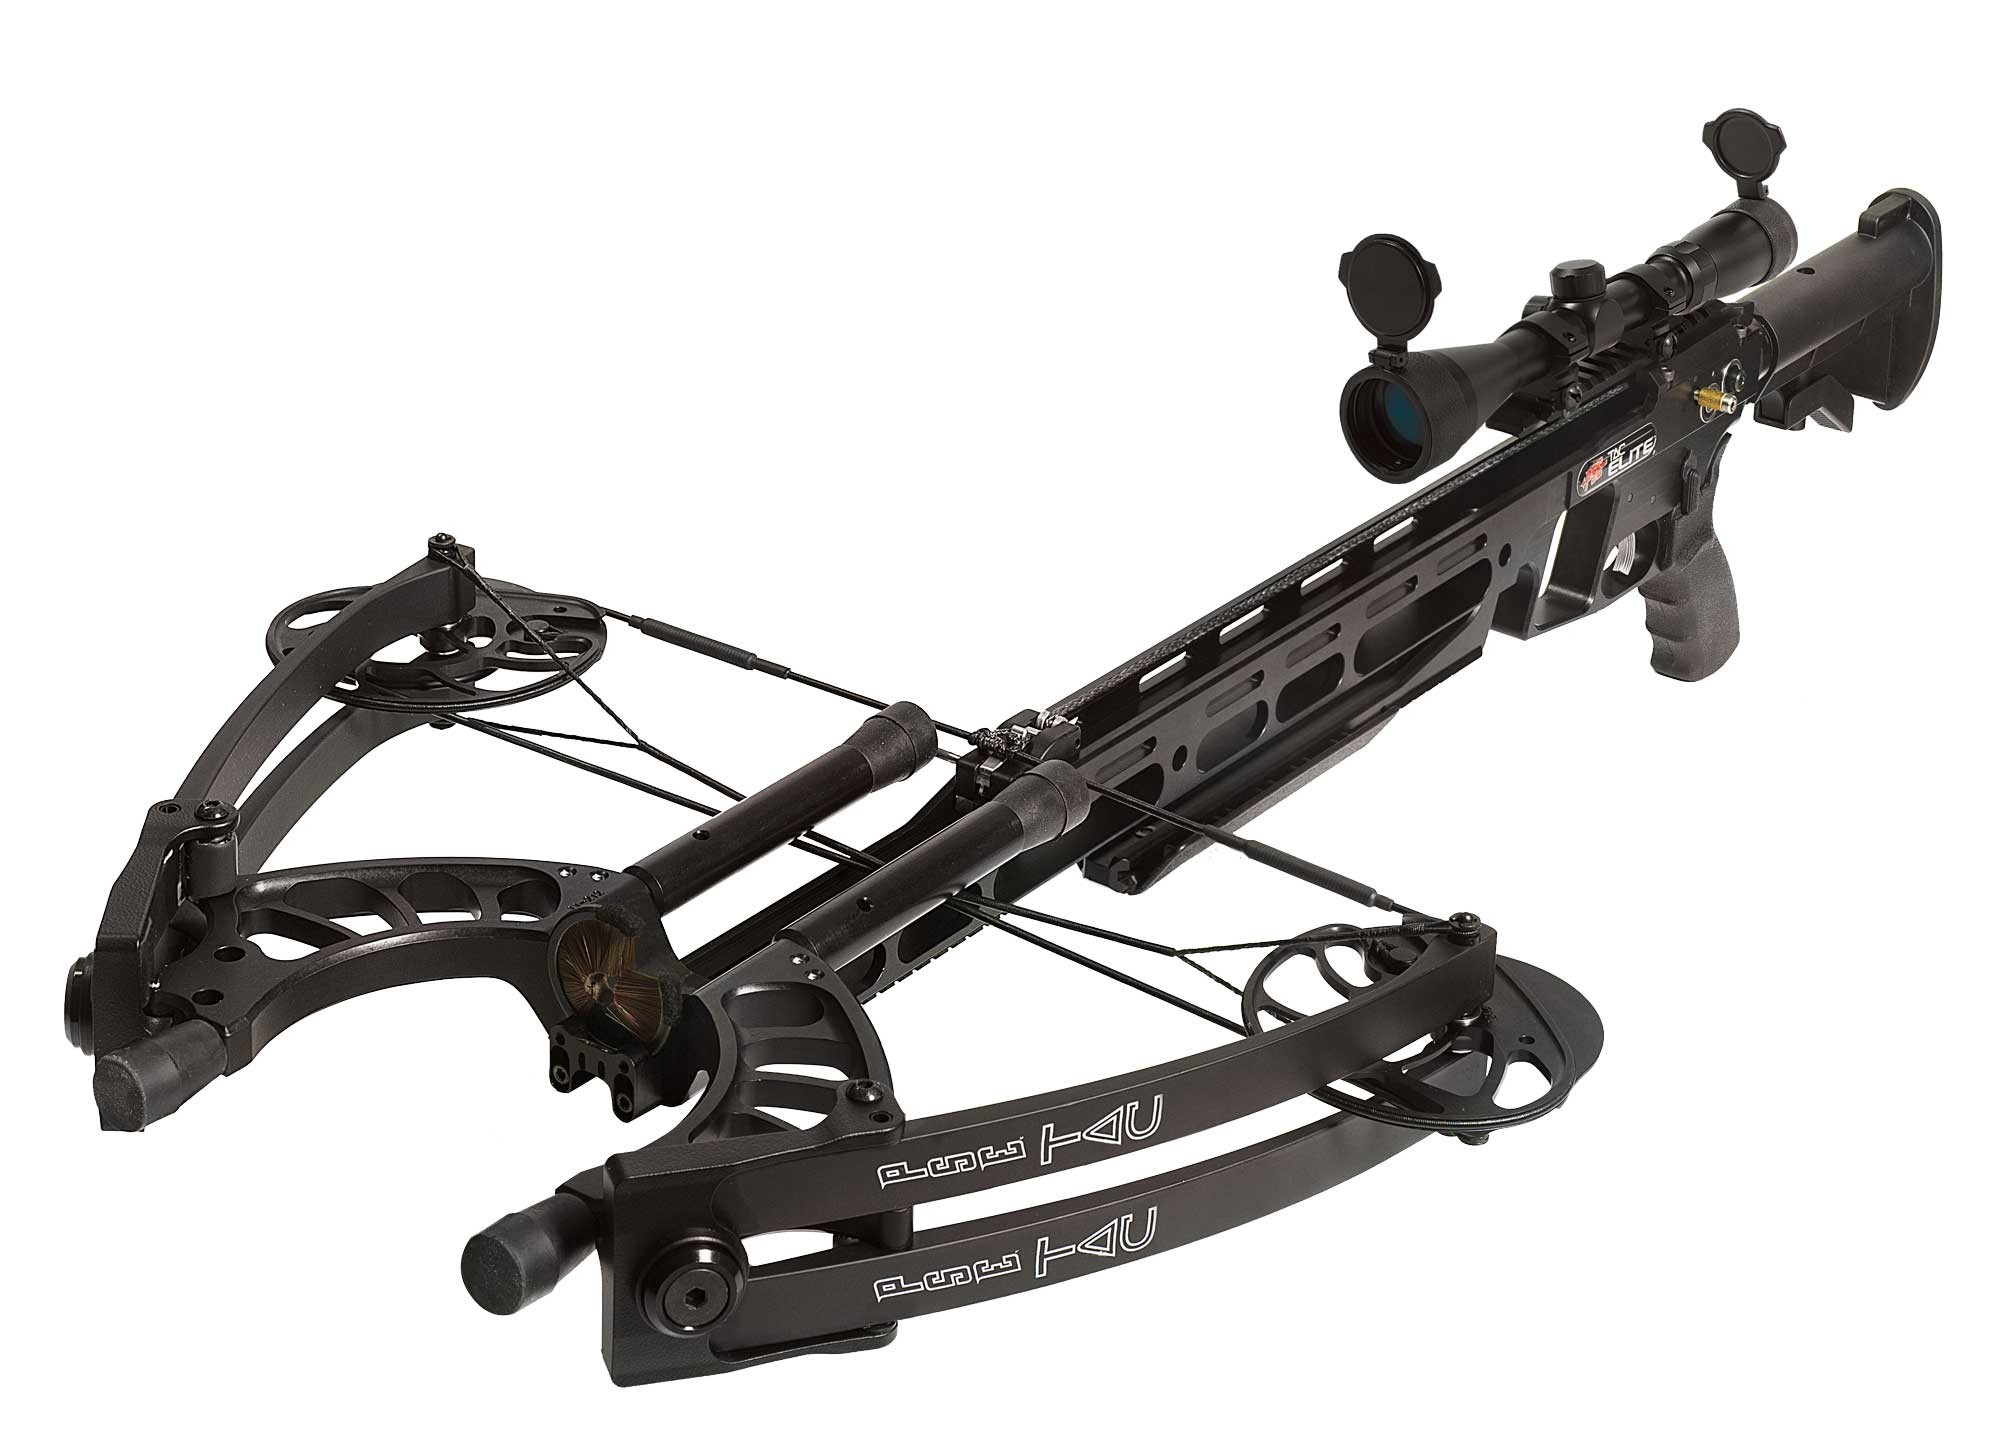 2000x1450 We are now shipping the new 2013 PSE TAC Elite integrated crossbow. The TAC  Elite crossbow is the improved version of the TAC model which has been  wildly ...